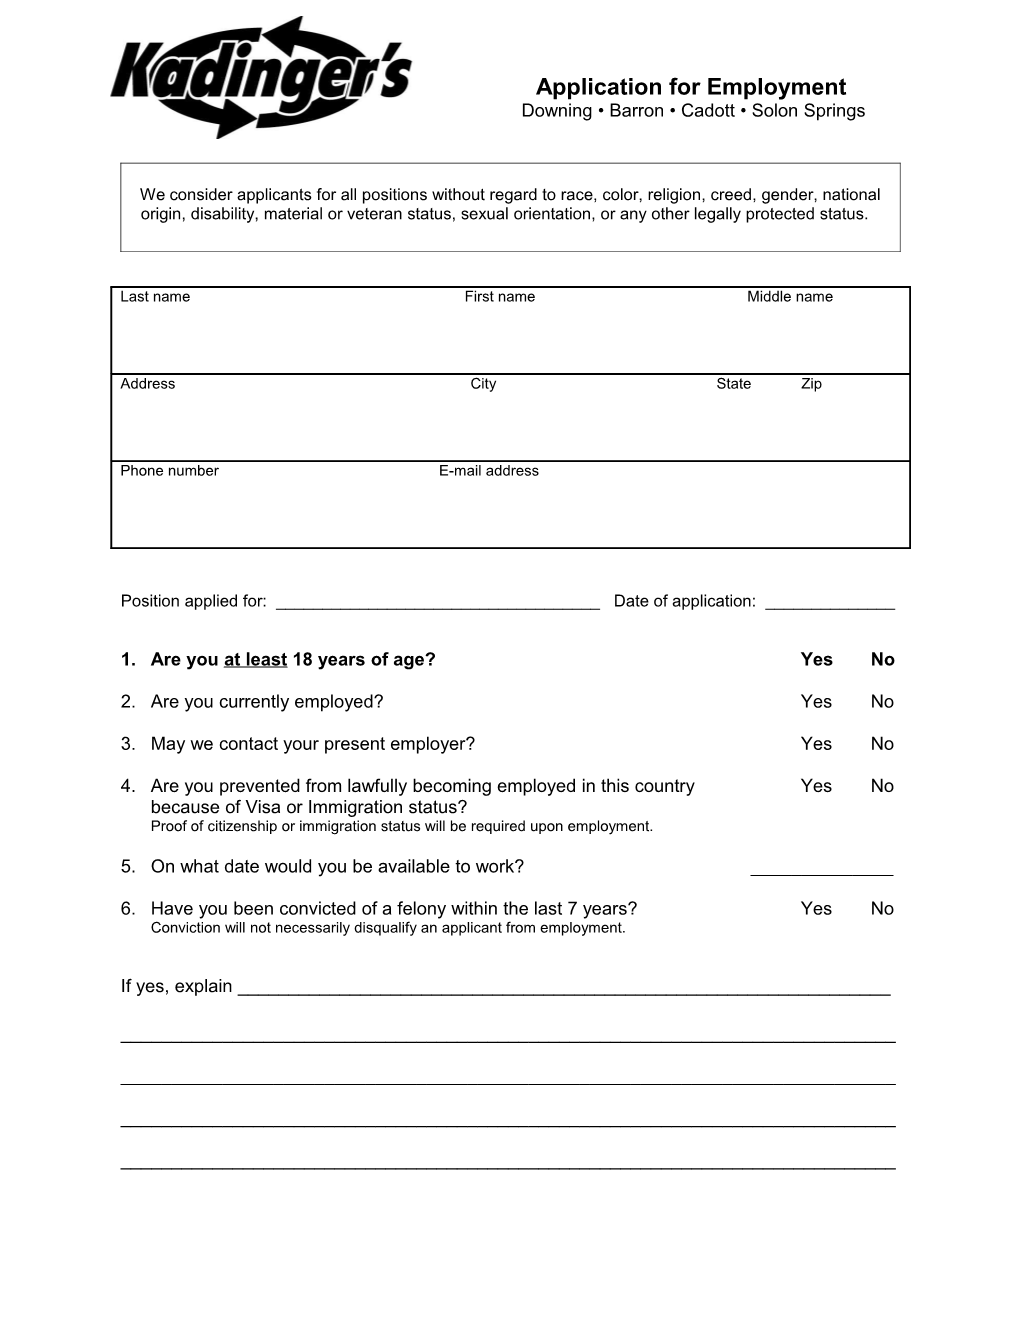 Application for Employment s17